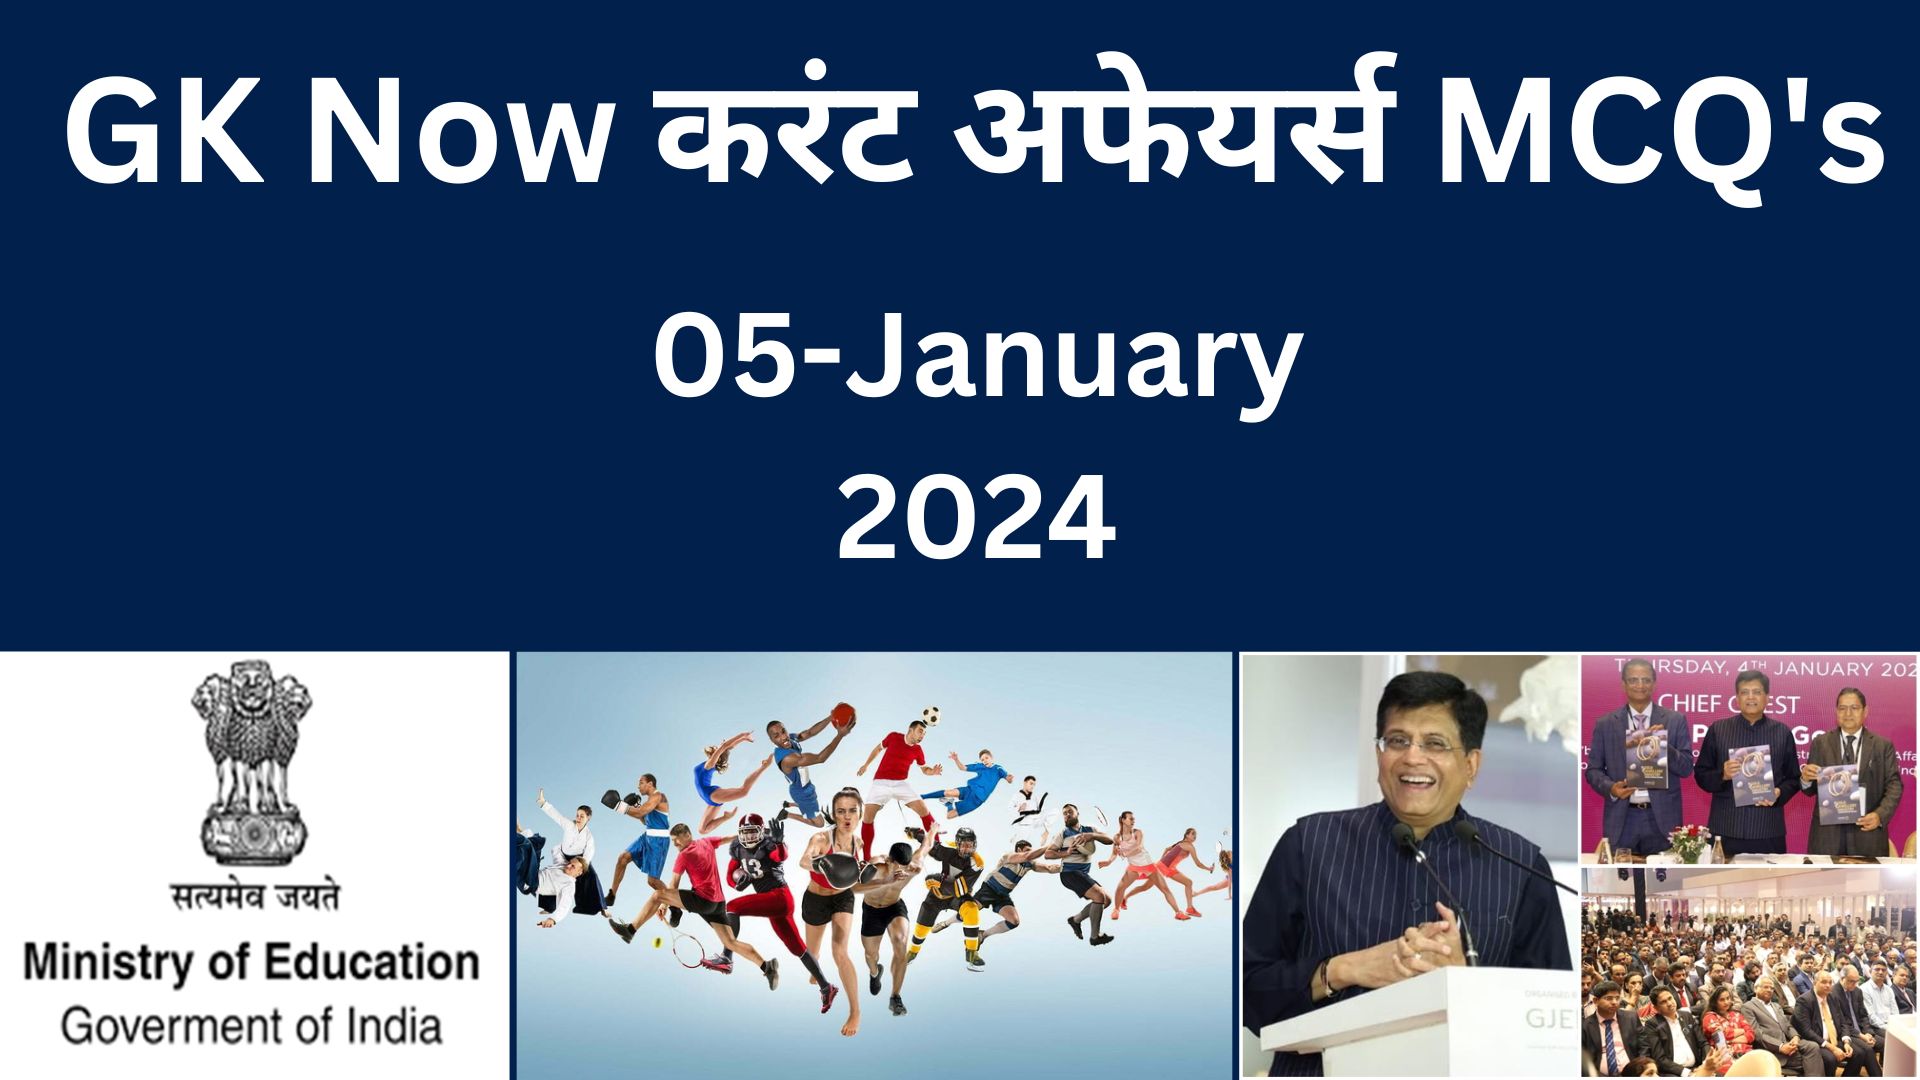 Daily Current Affairs MCQ 05 January 2024 GK Now